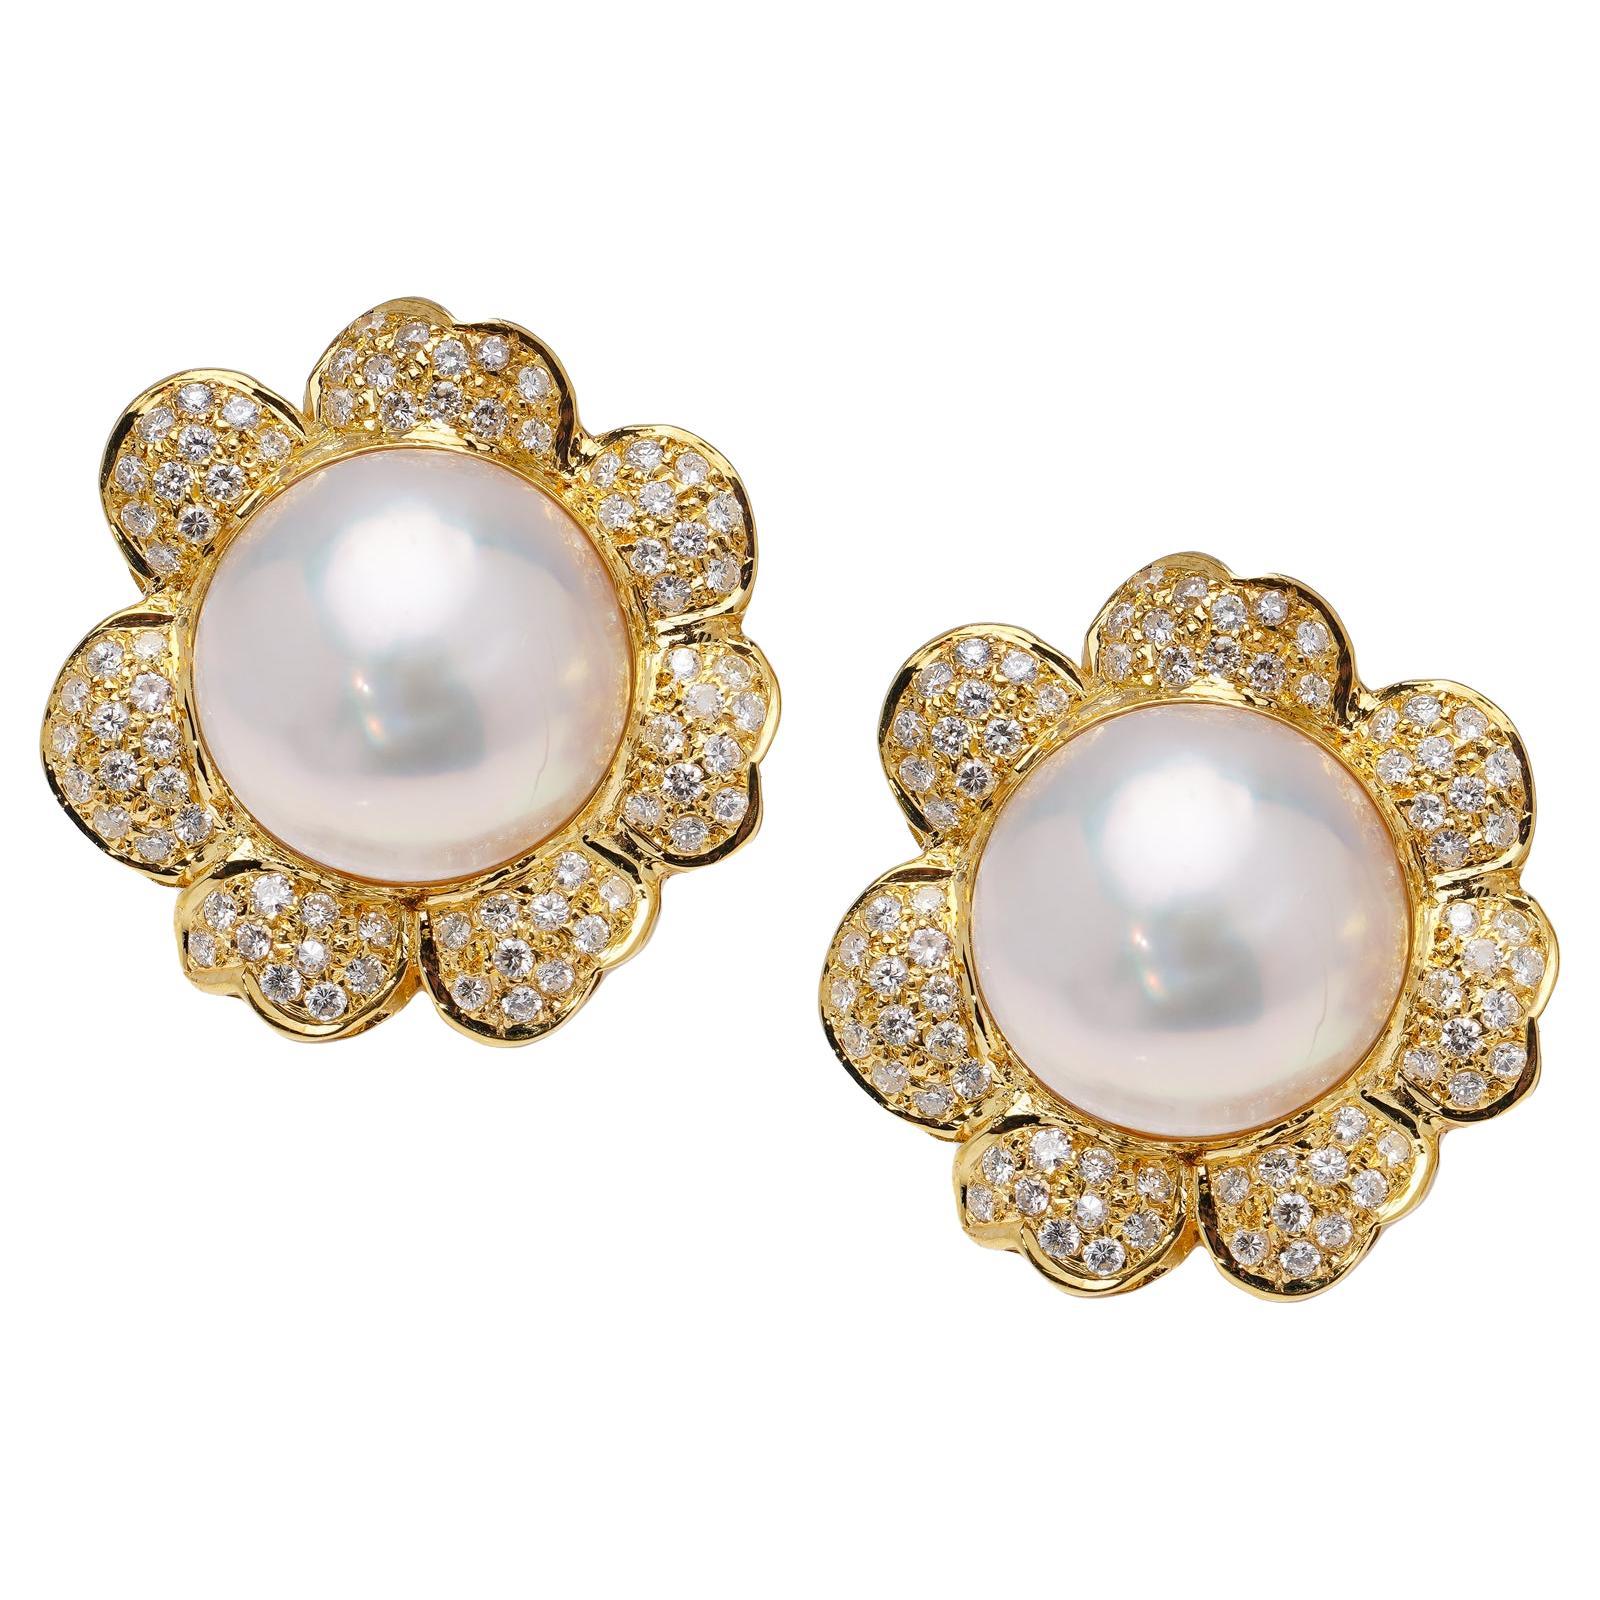 18kt Yellow Gold Flower-Shaped Clip-On Earrings with Pearls